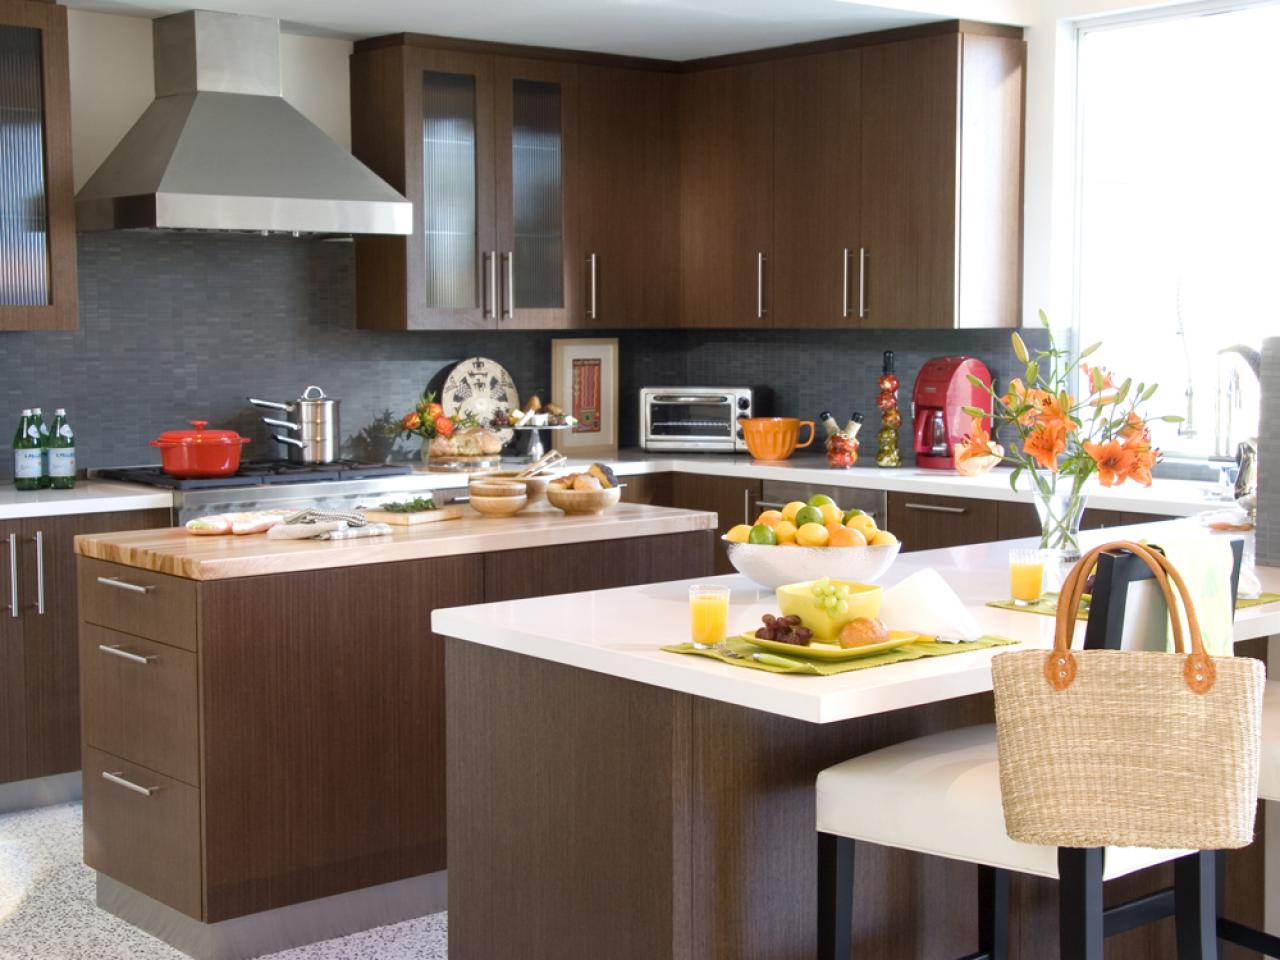 Transform Your Kitchen with Budget-Friendly Cabinets Online